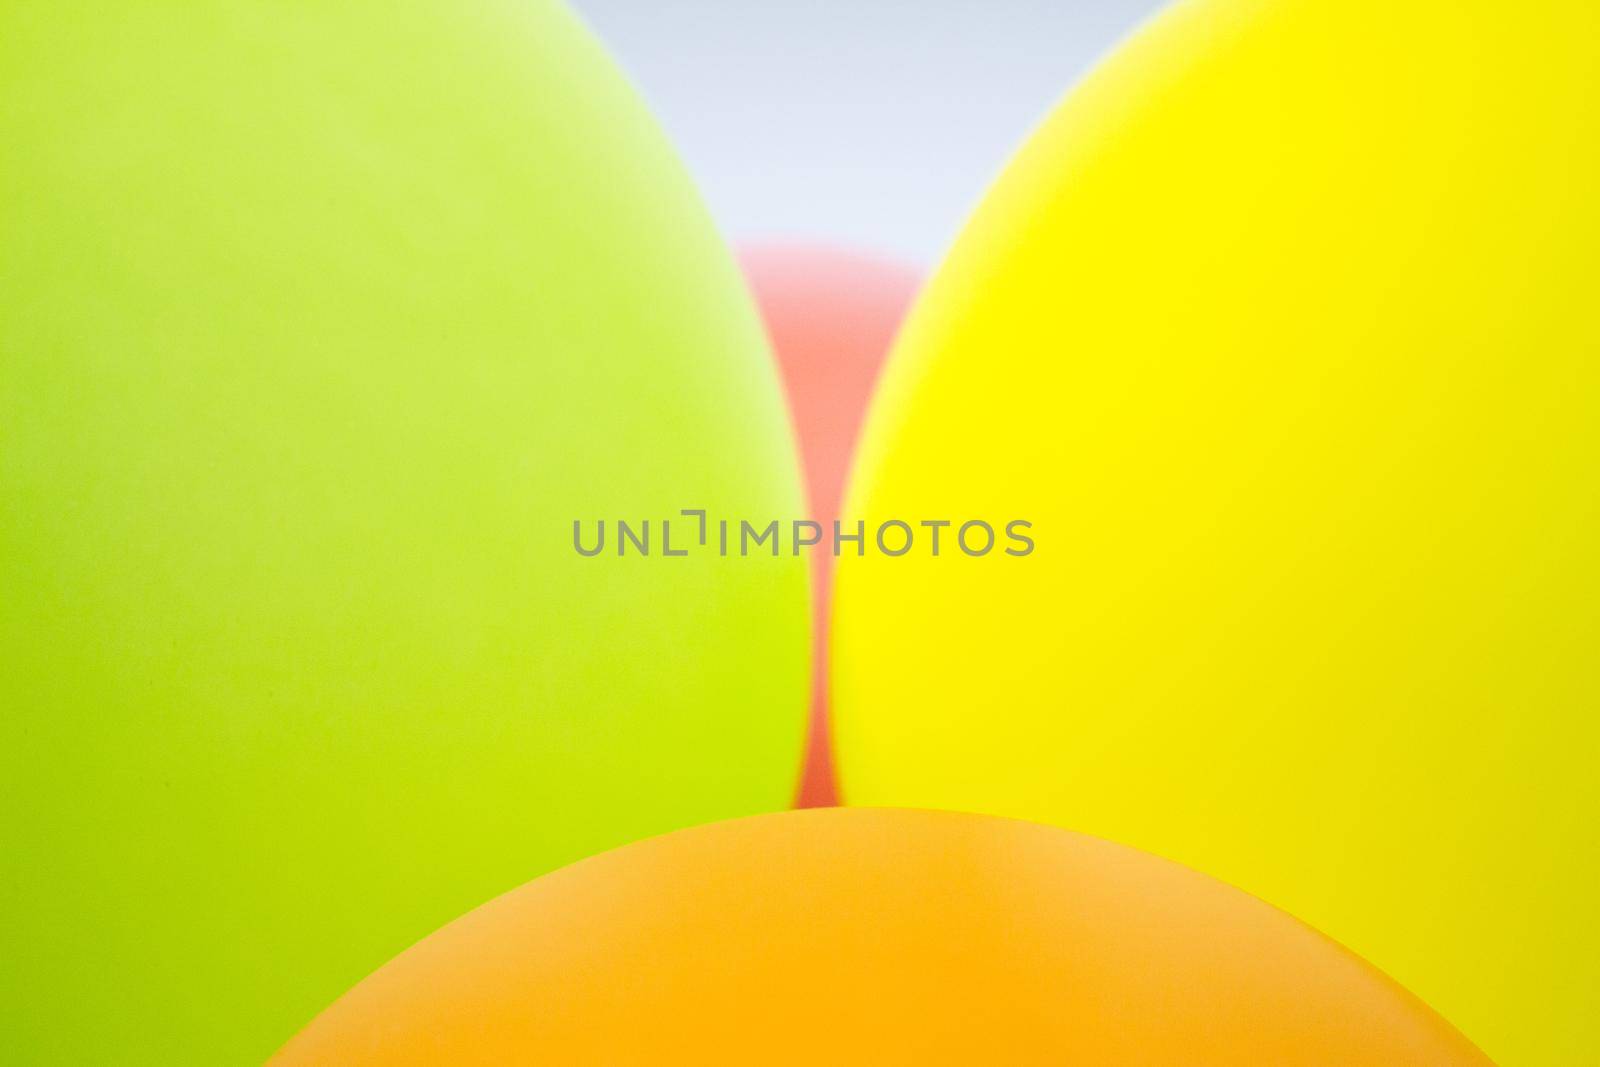 Balloons of colors grouped, green, pink, yellow, orange, pink. No people